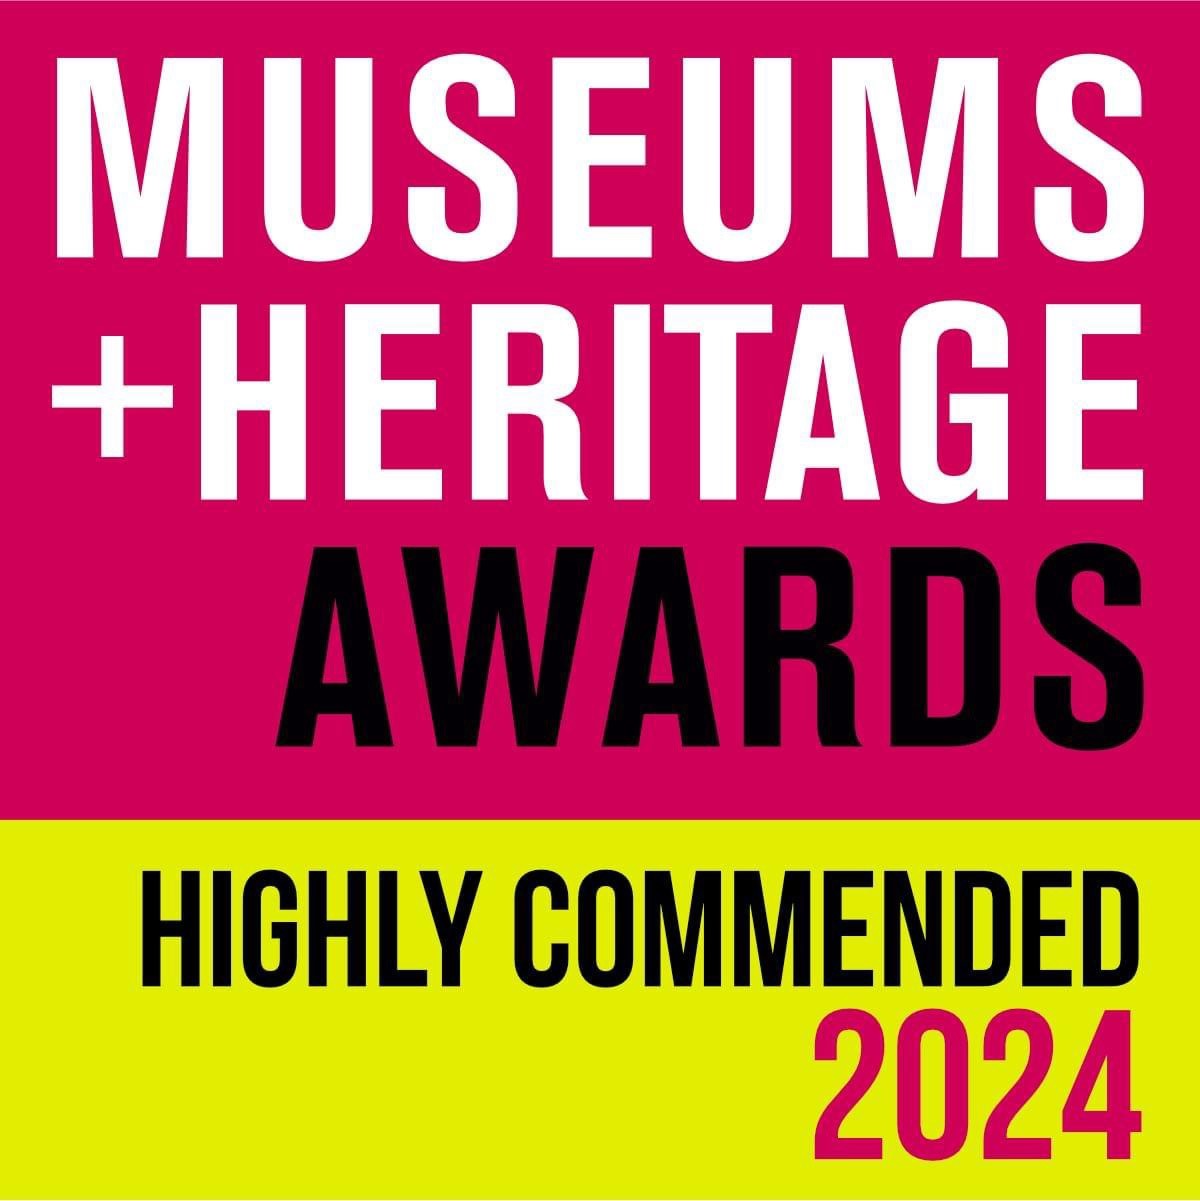 Museums and Heritage Awards Highly Commended 2024